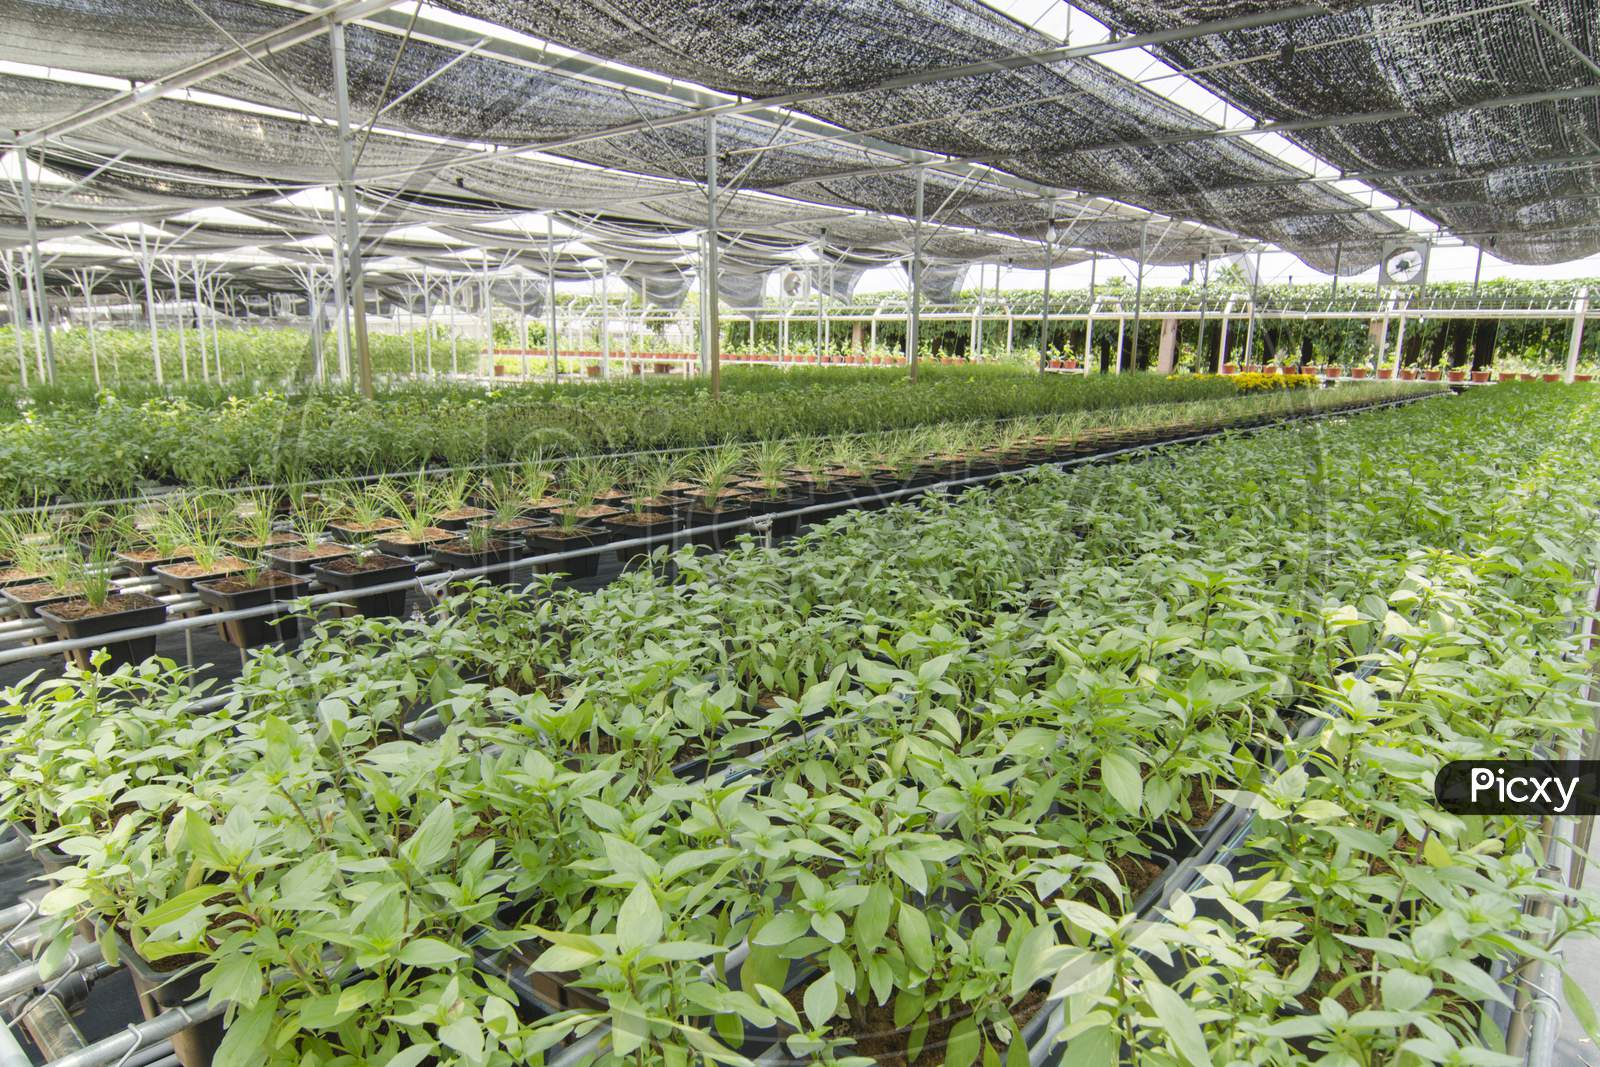 Organic Farm Is  Agricultural System Rapidly Developed Now. Organic Crops Growing In Plastic Covered Greenhouse